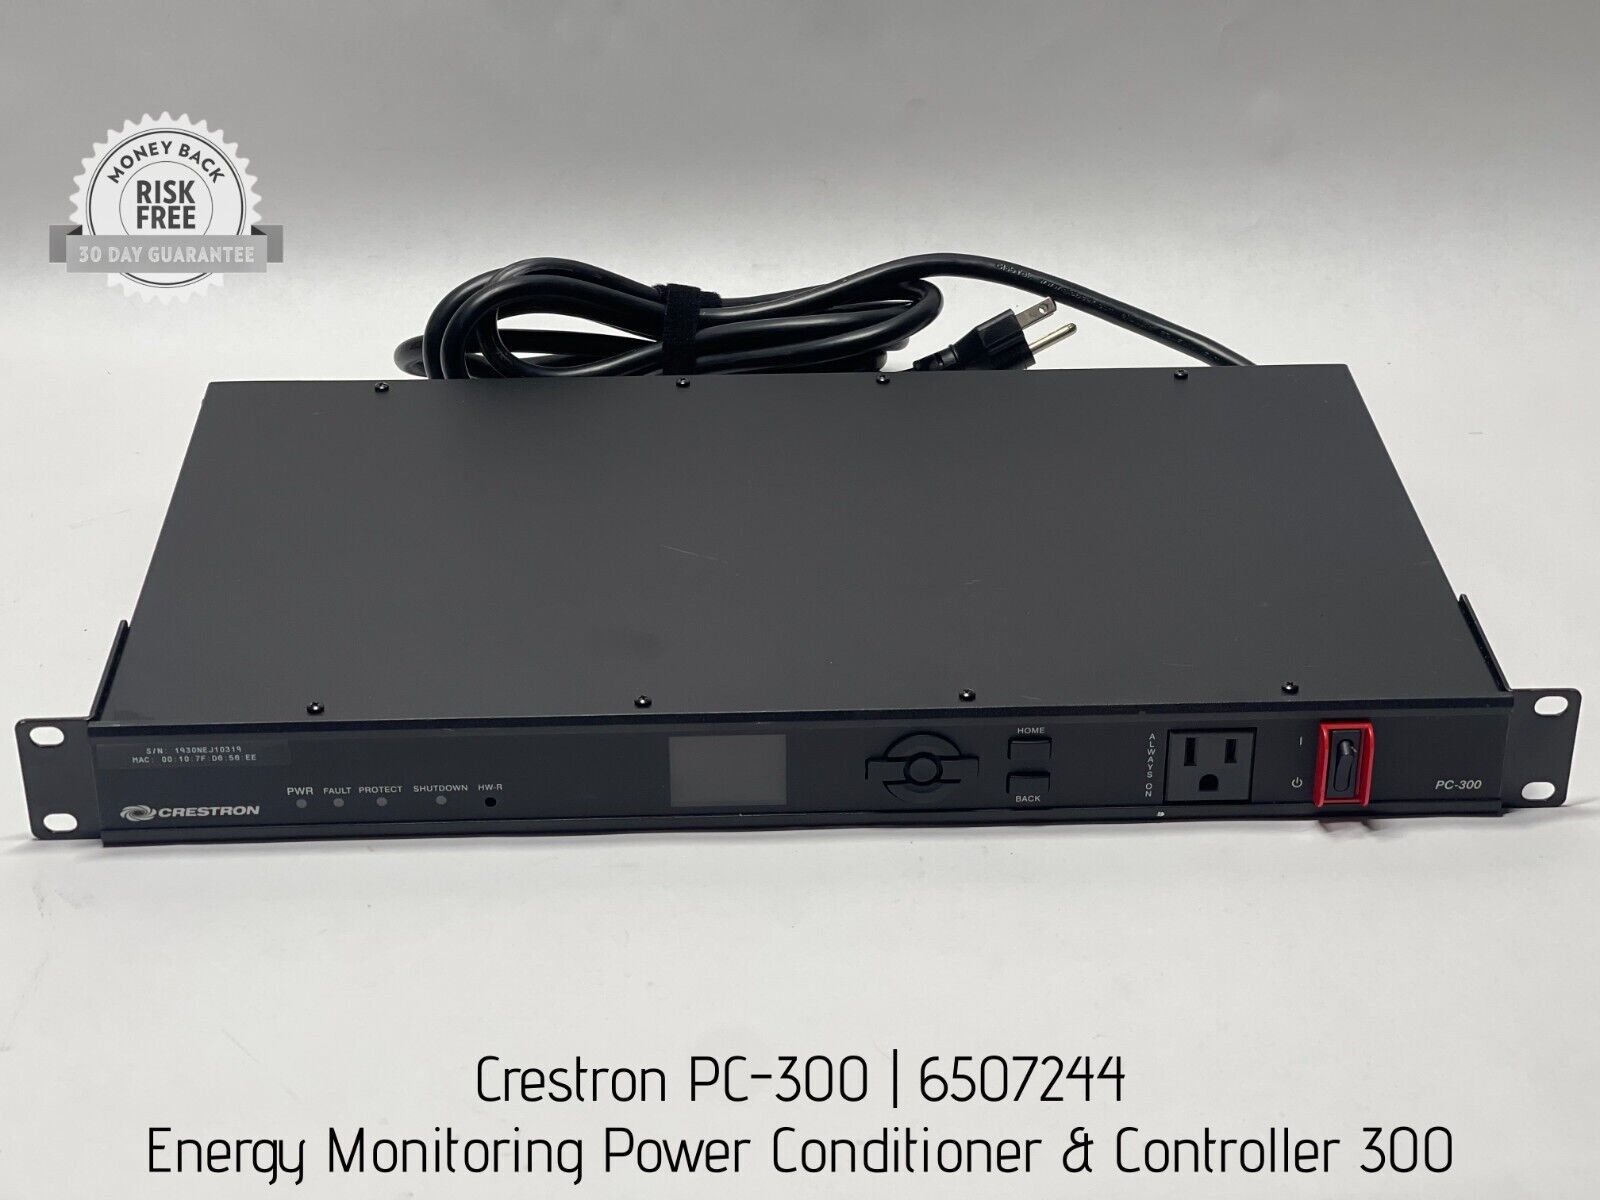 Crestron PC-300 Energy Monitoring Power Conditioner & Controller 300, 6507244